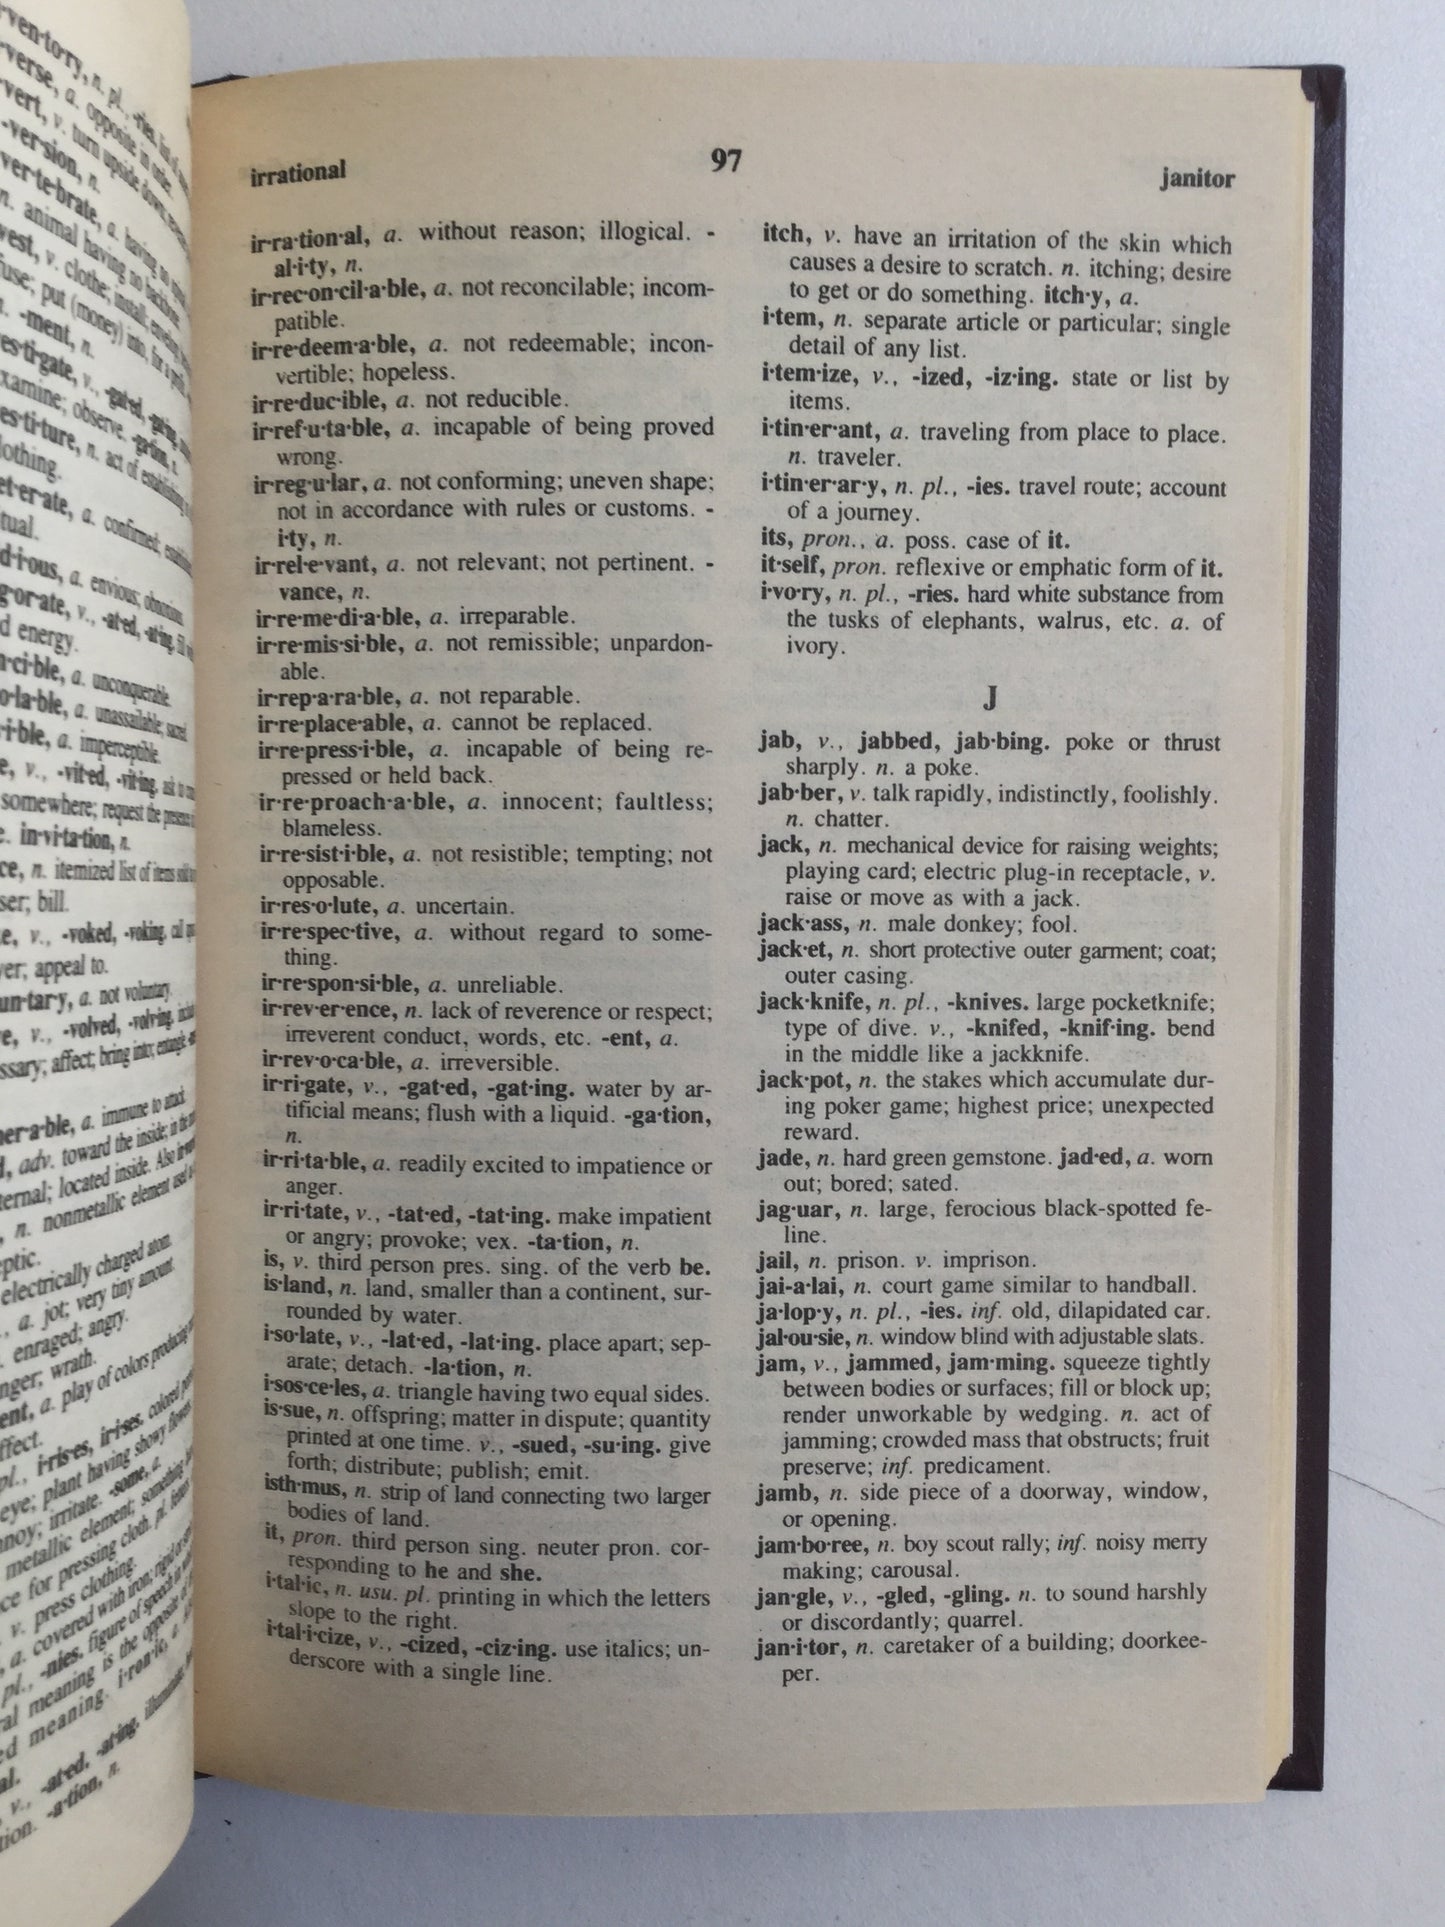 The New Webster’s Dictionary-Red Barn Collections